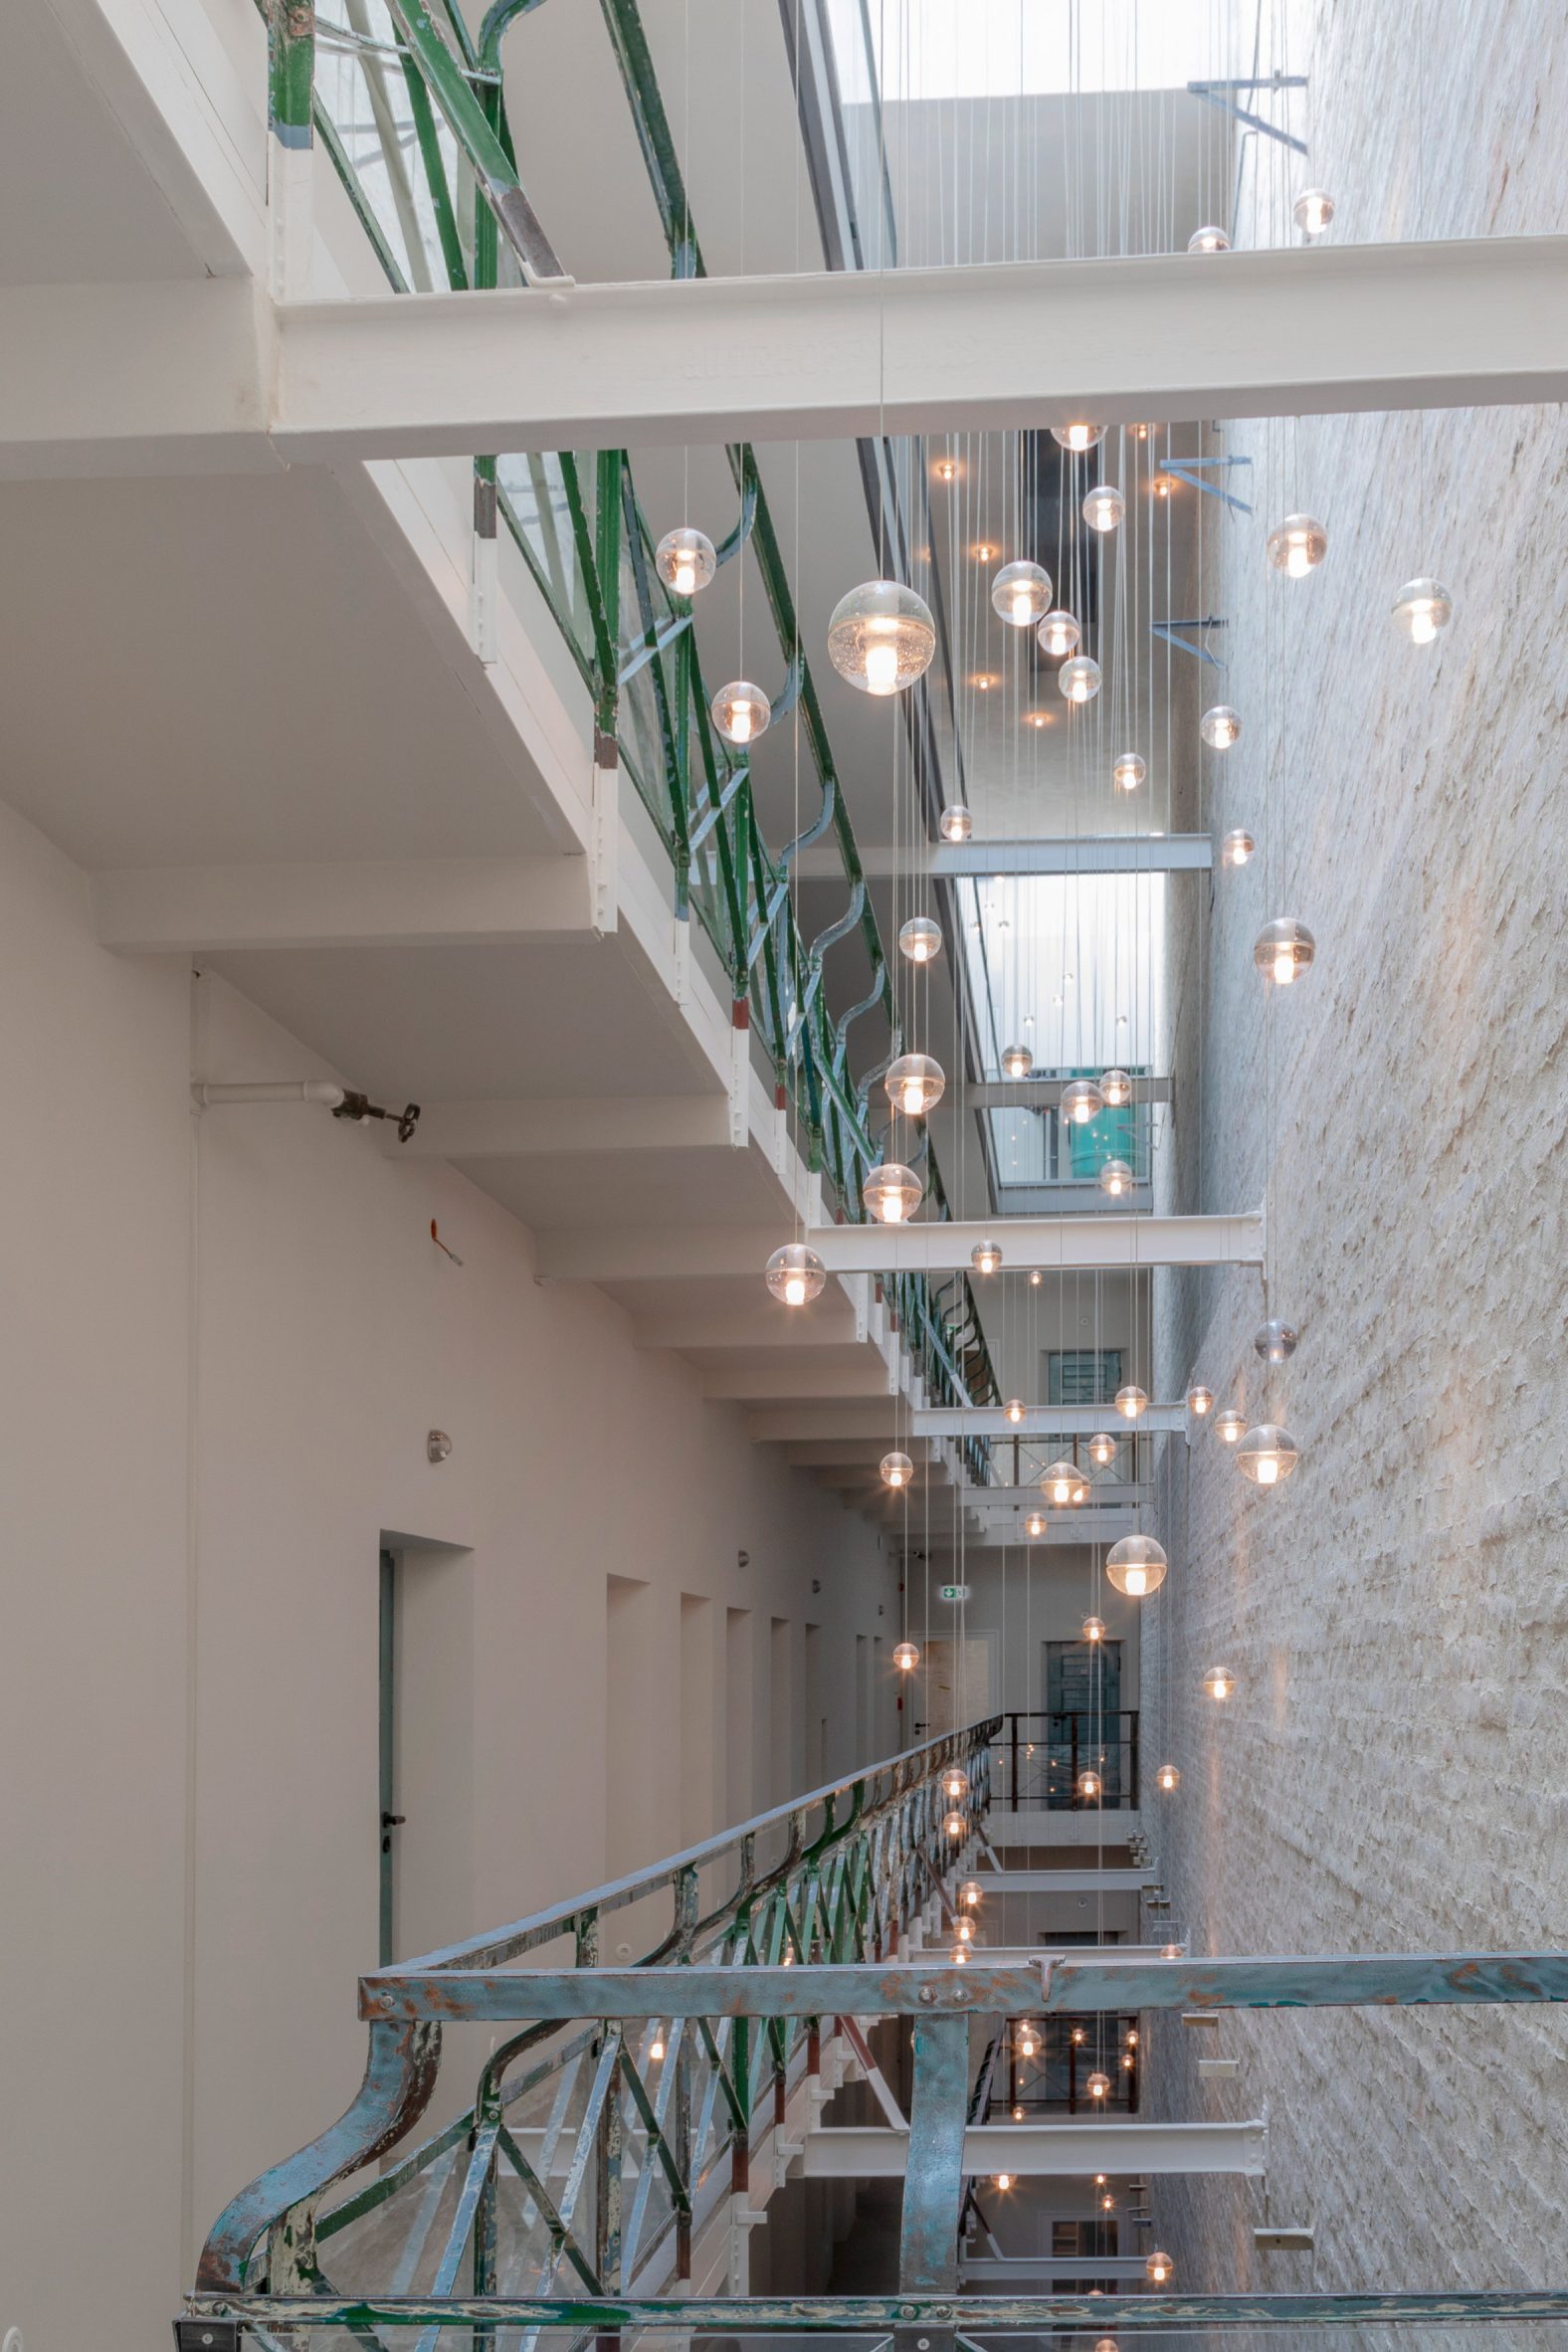 Corridors across different levels of Berlin hotel Wilmina with hanging lights